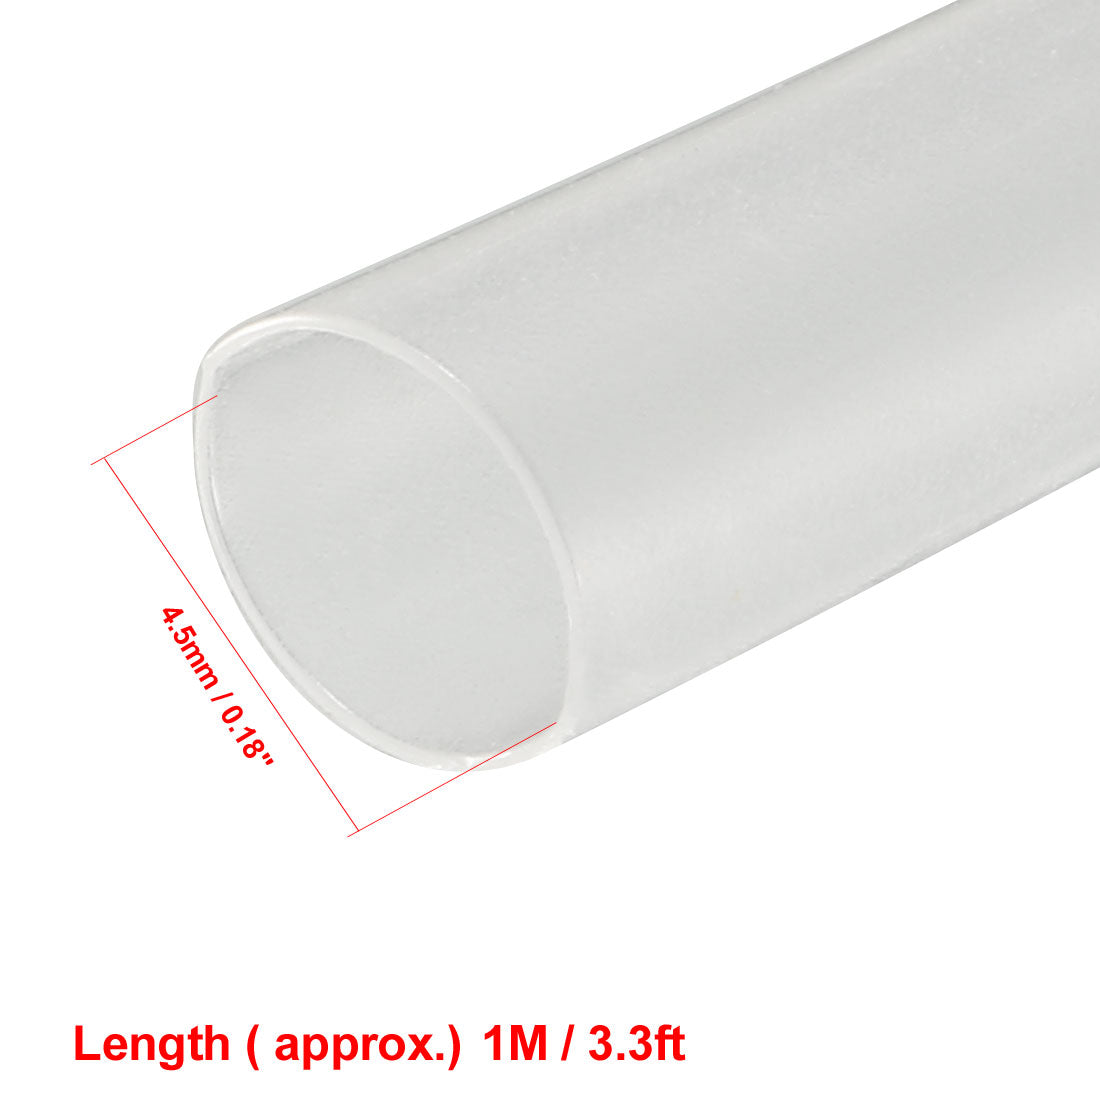 uxcell Uxcell Heat Shrink Tube 2:1 Electrical Insulation Tube Wire Cable Tubing Sleeving Wrap Clear 4.5mm Diameter 1m Long